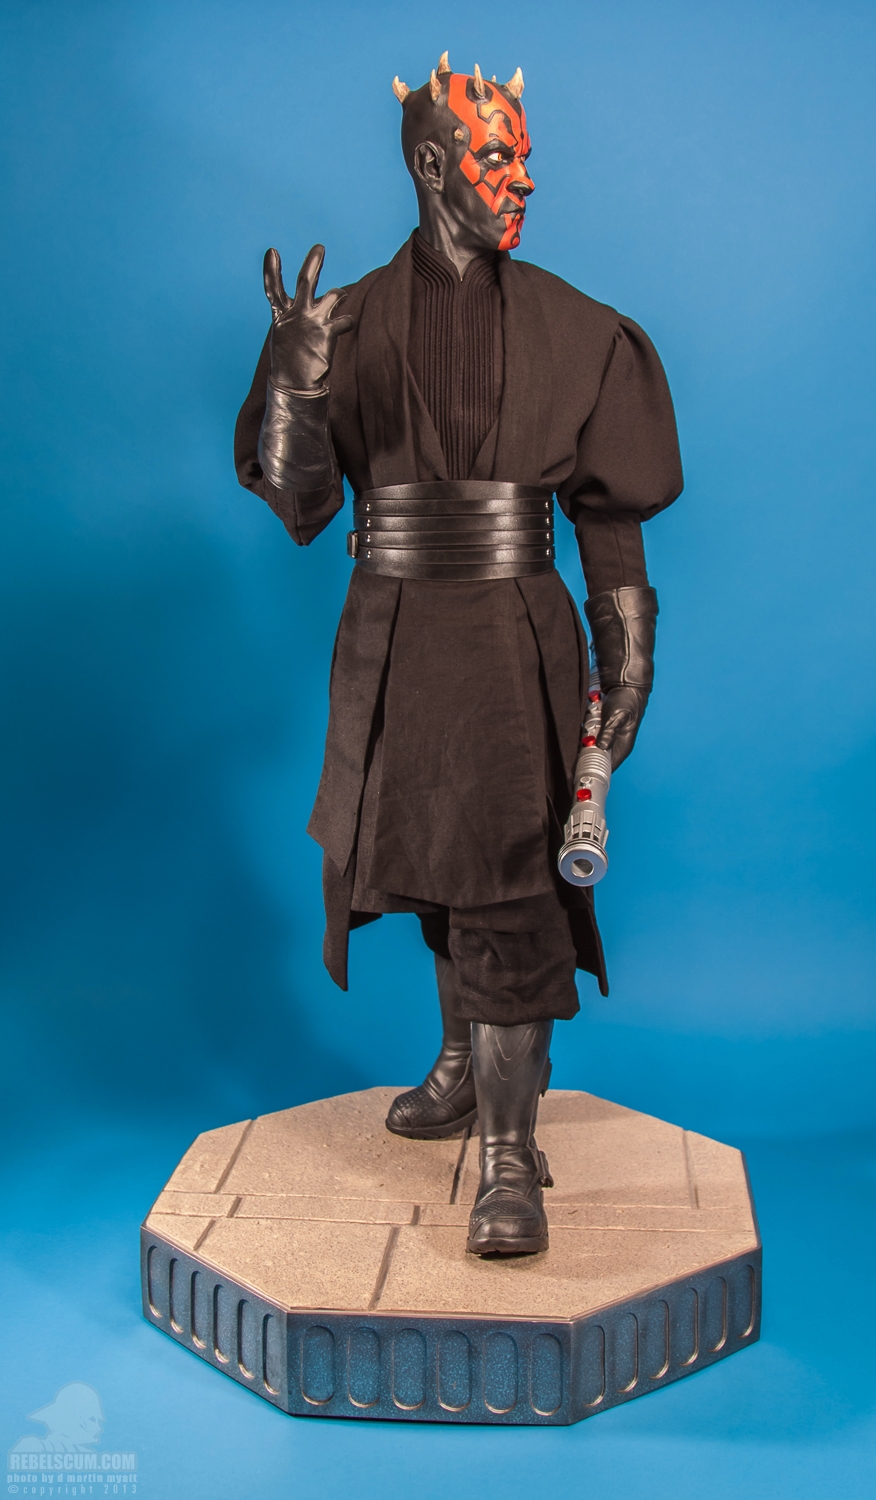 Darth_Maul_Legendary_Scale_Figure_Sideshow_Collectibles-03.jpg